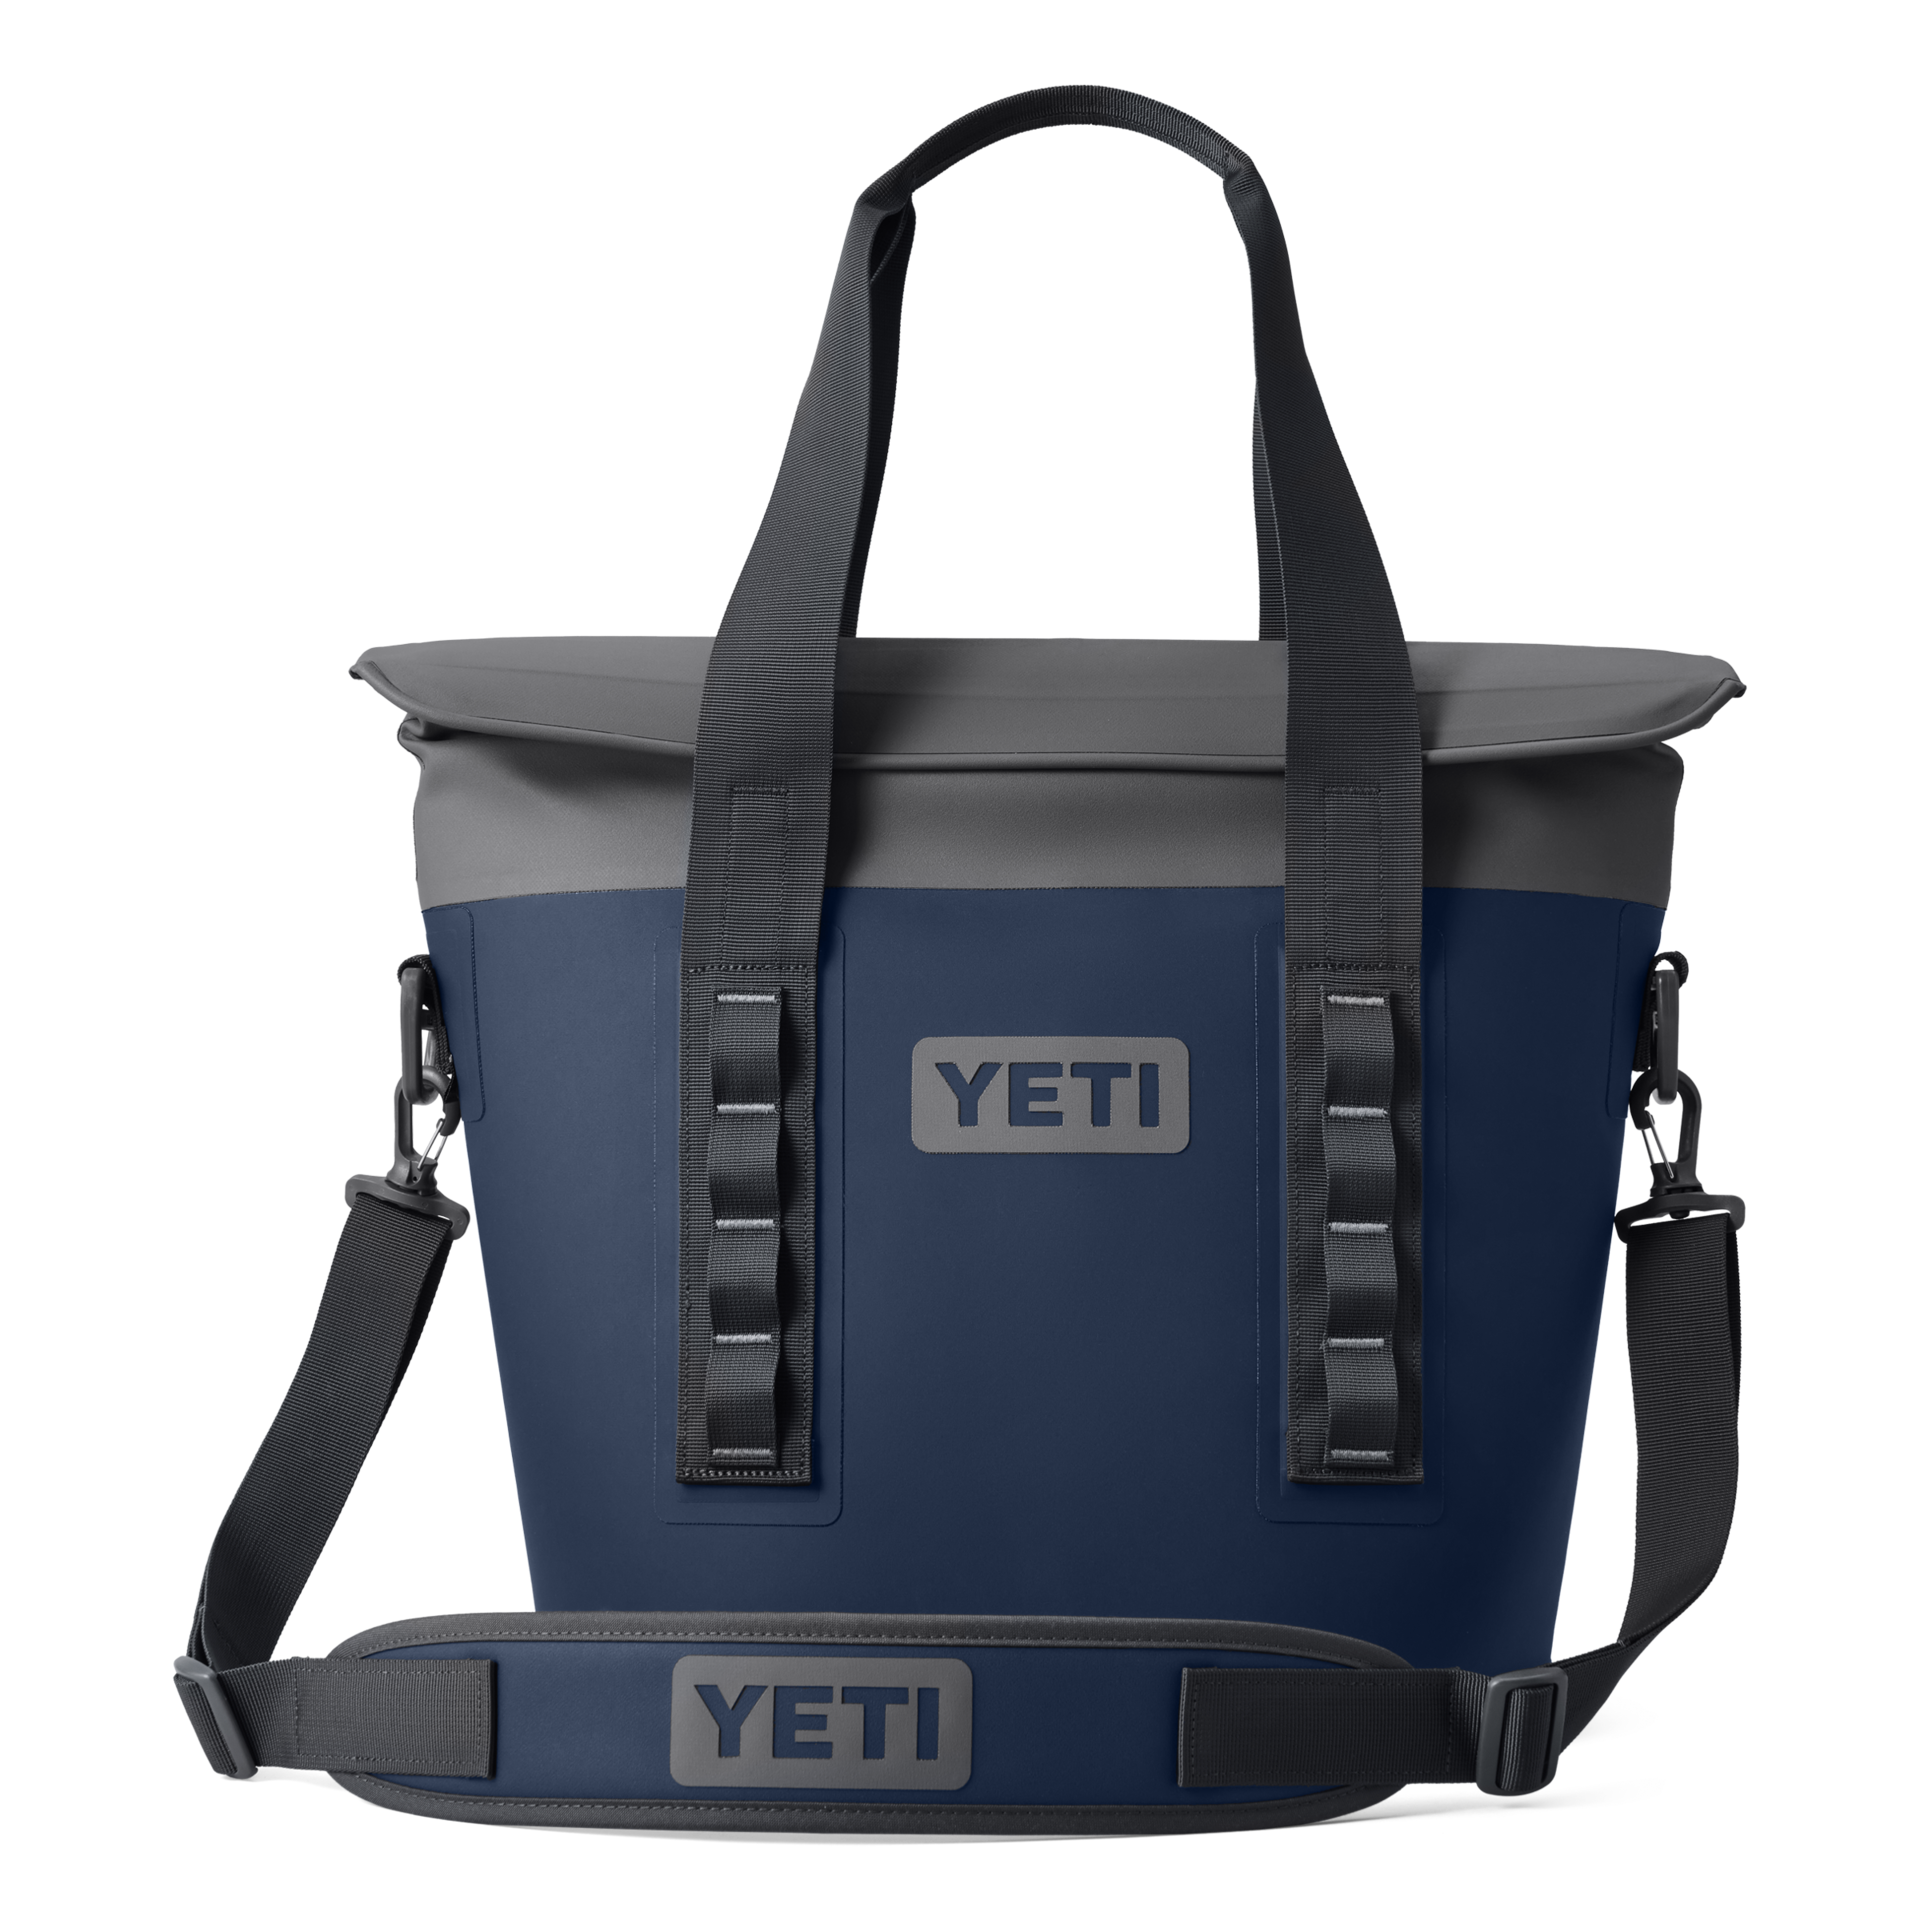 Grab a cheap Yeti cooler in Camp Green, Navy Blue, or Cosmic Lilac